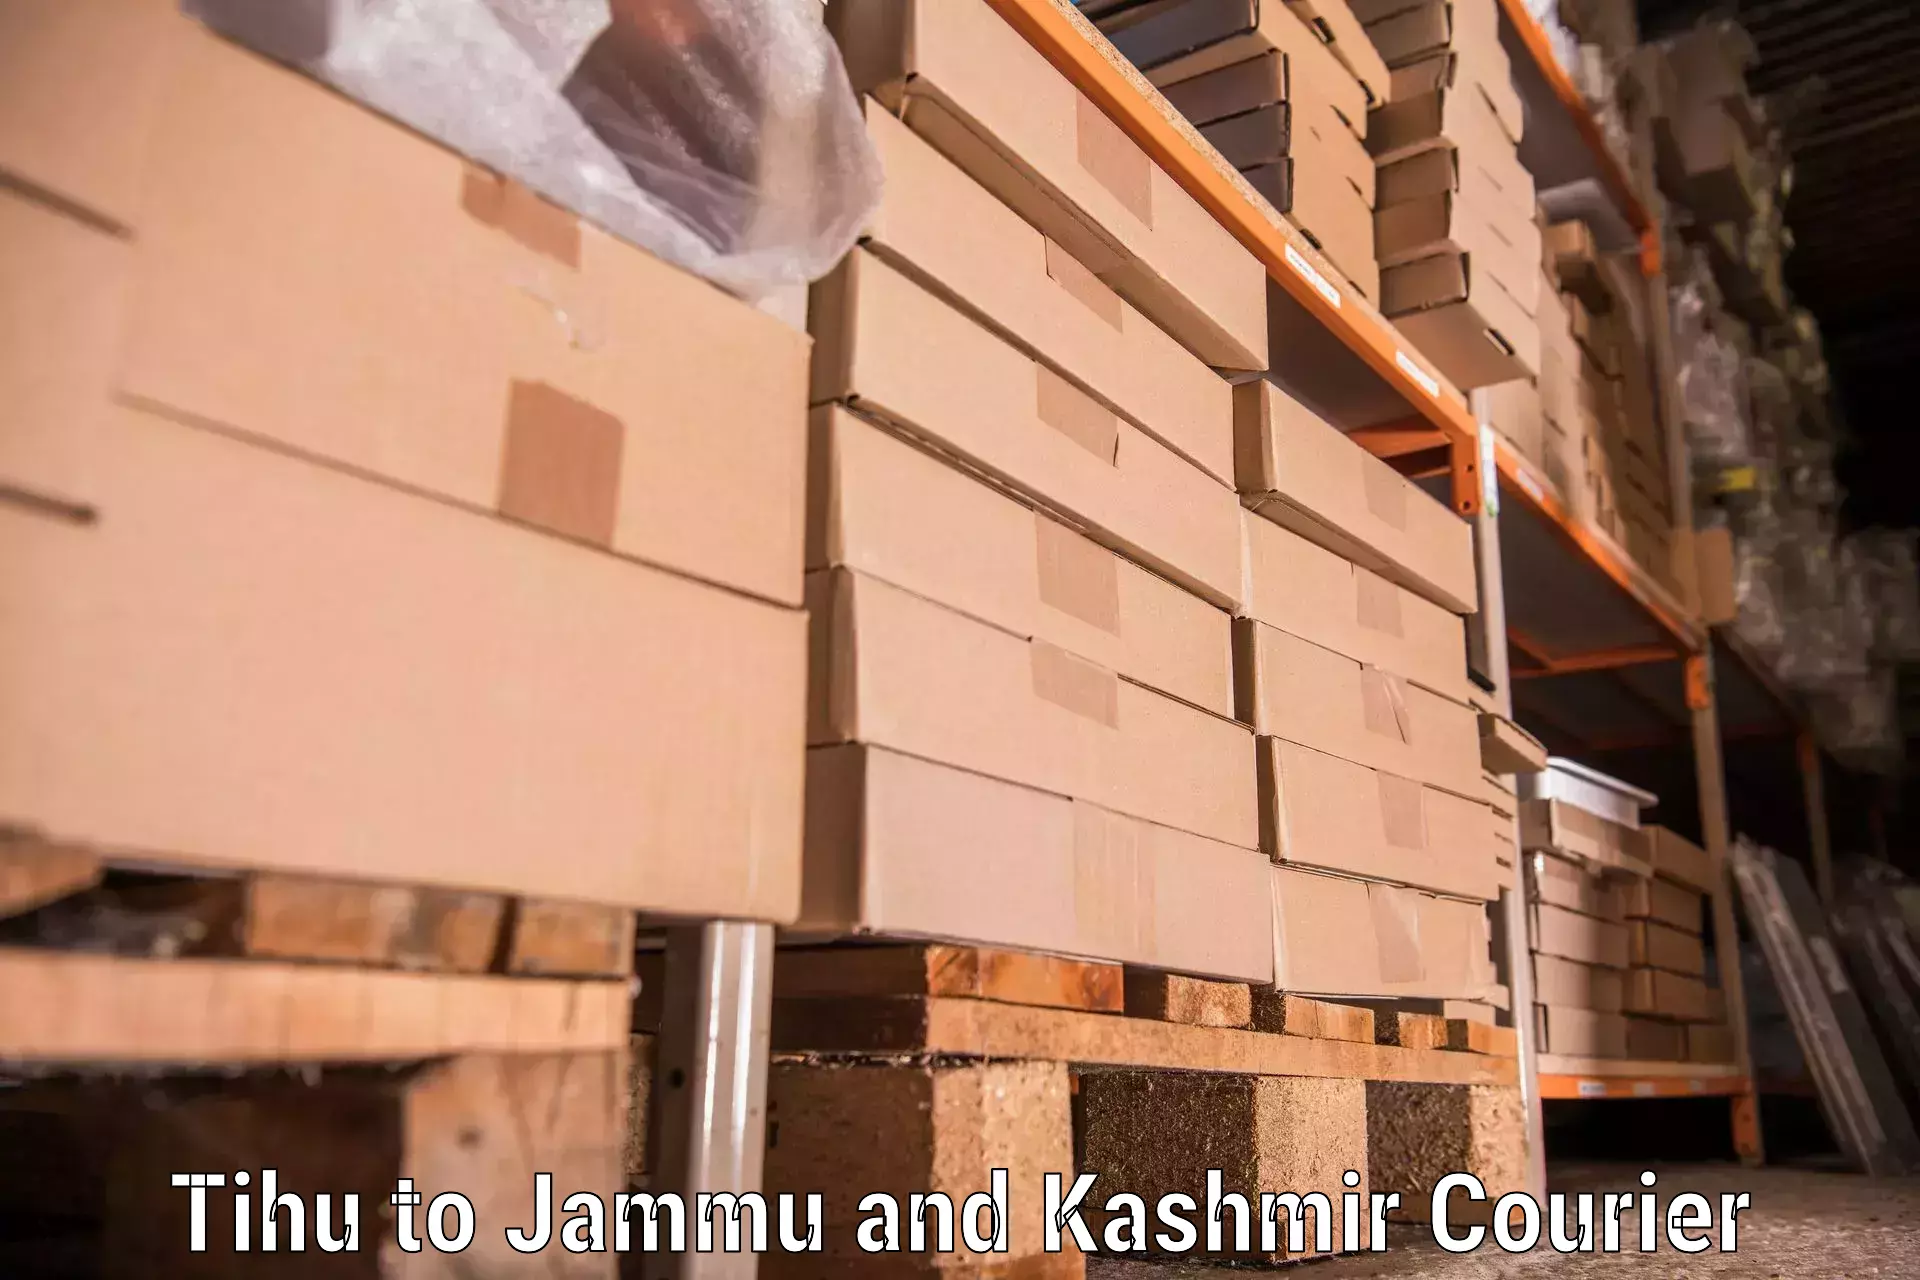 High-quality moving services in Tihu to Udhampur